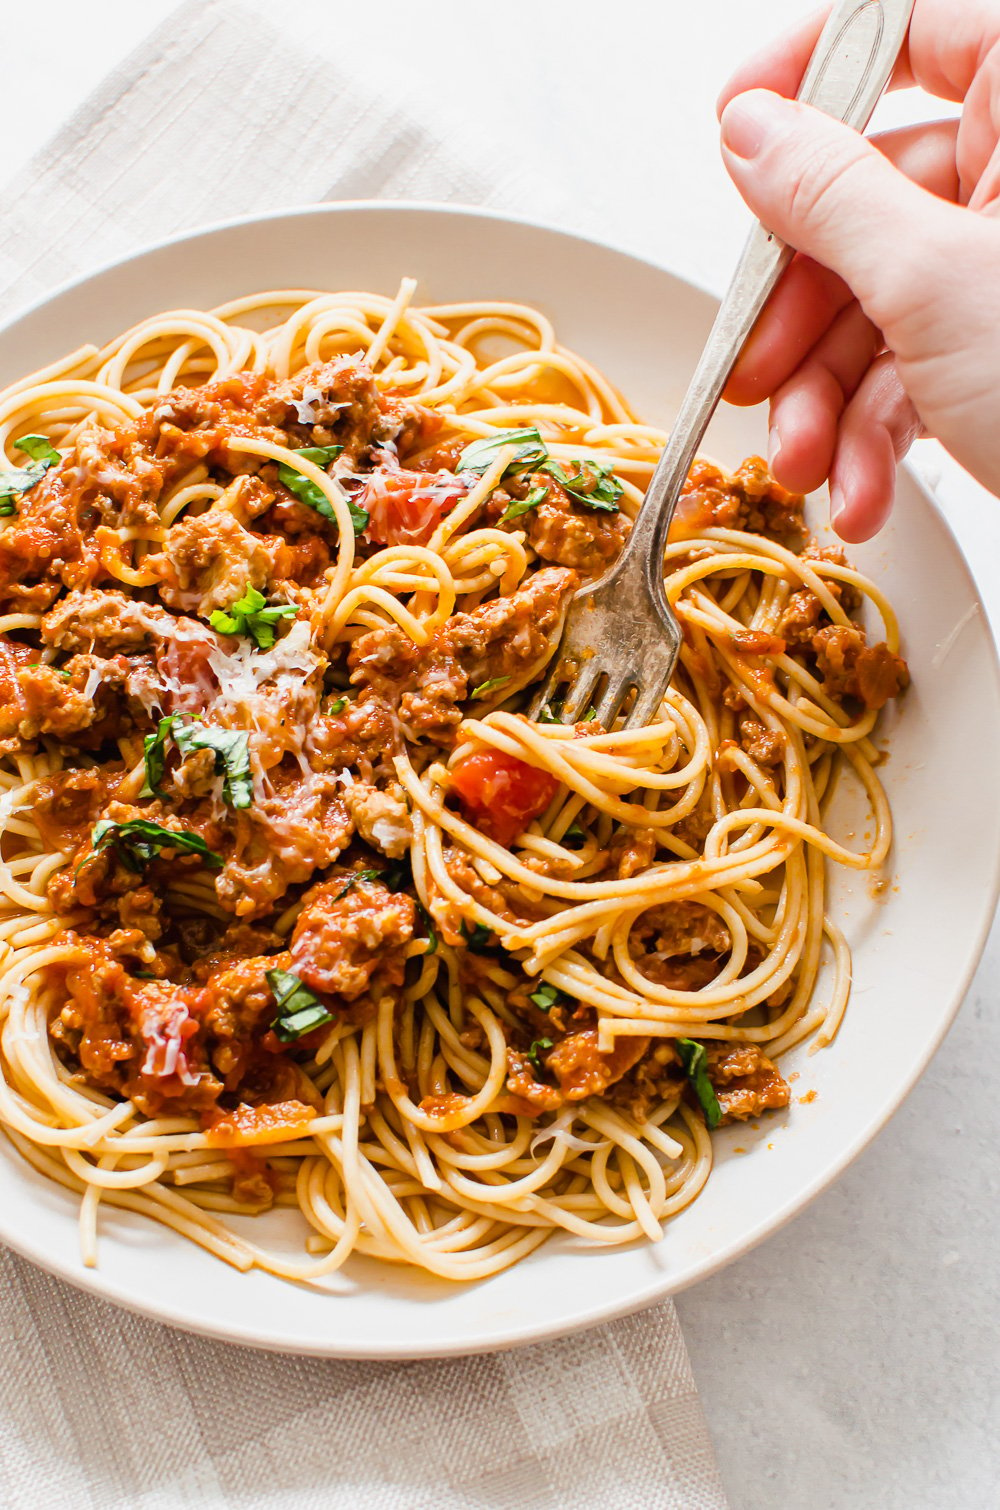 A hand with a fork twirling a bite of spaghetti and meat sauce on a plate.